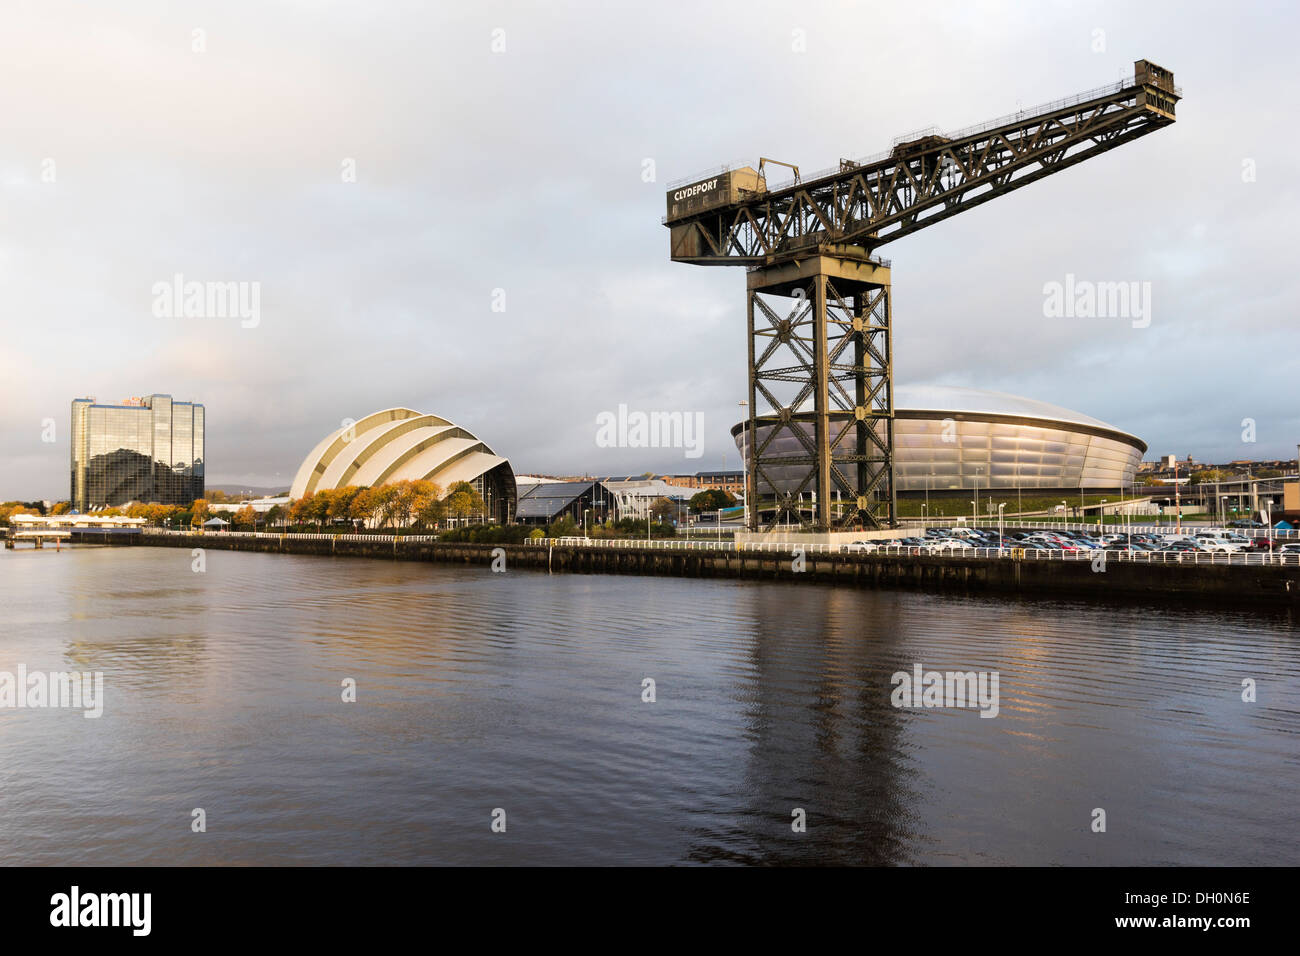 View over the River Clyde from the Clyde Arc of the Finnieston crane, SSE Hydro, Clyde Auditorium, and Crowne Plaza Hotel Stock Photo